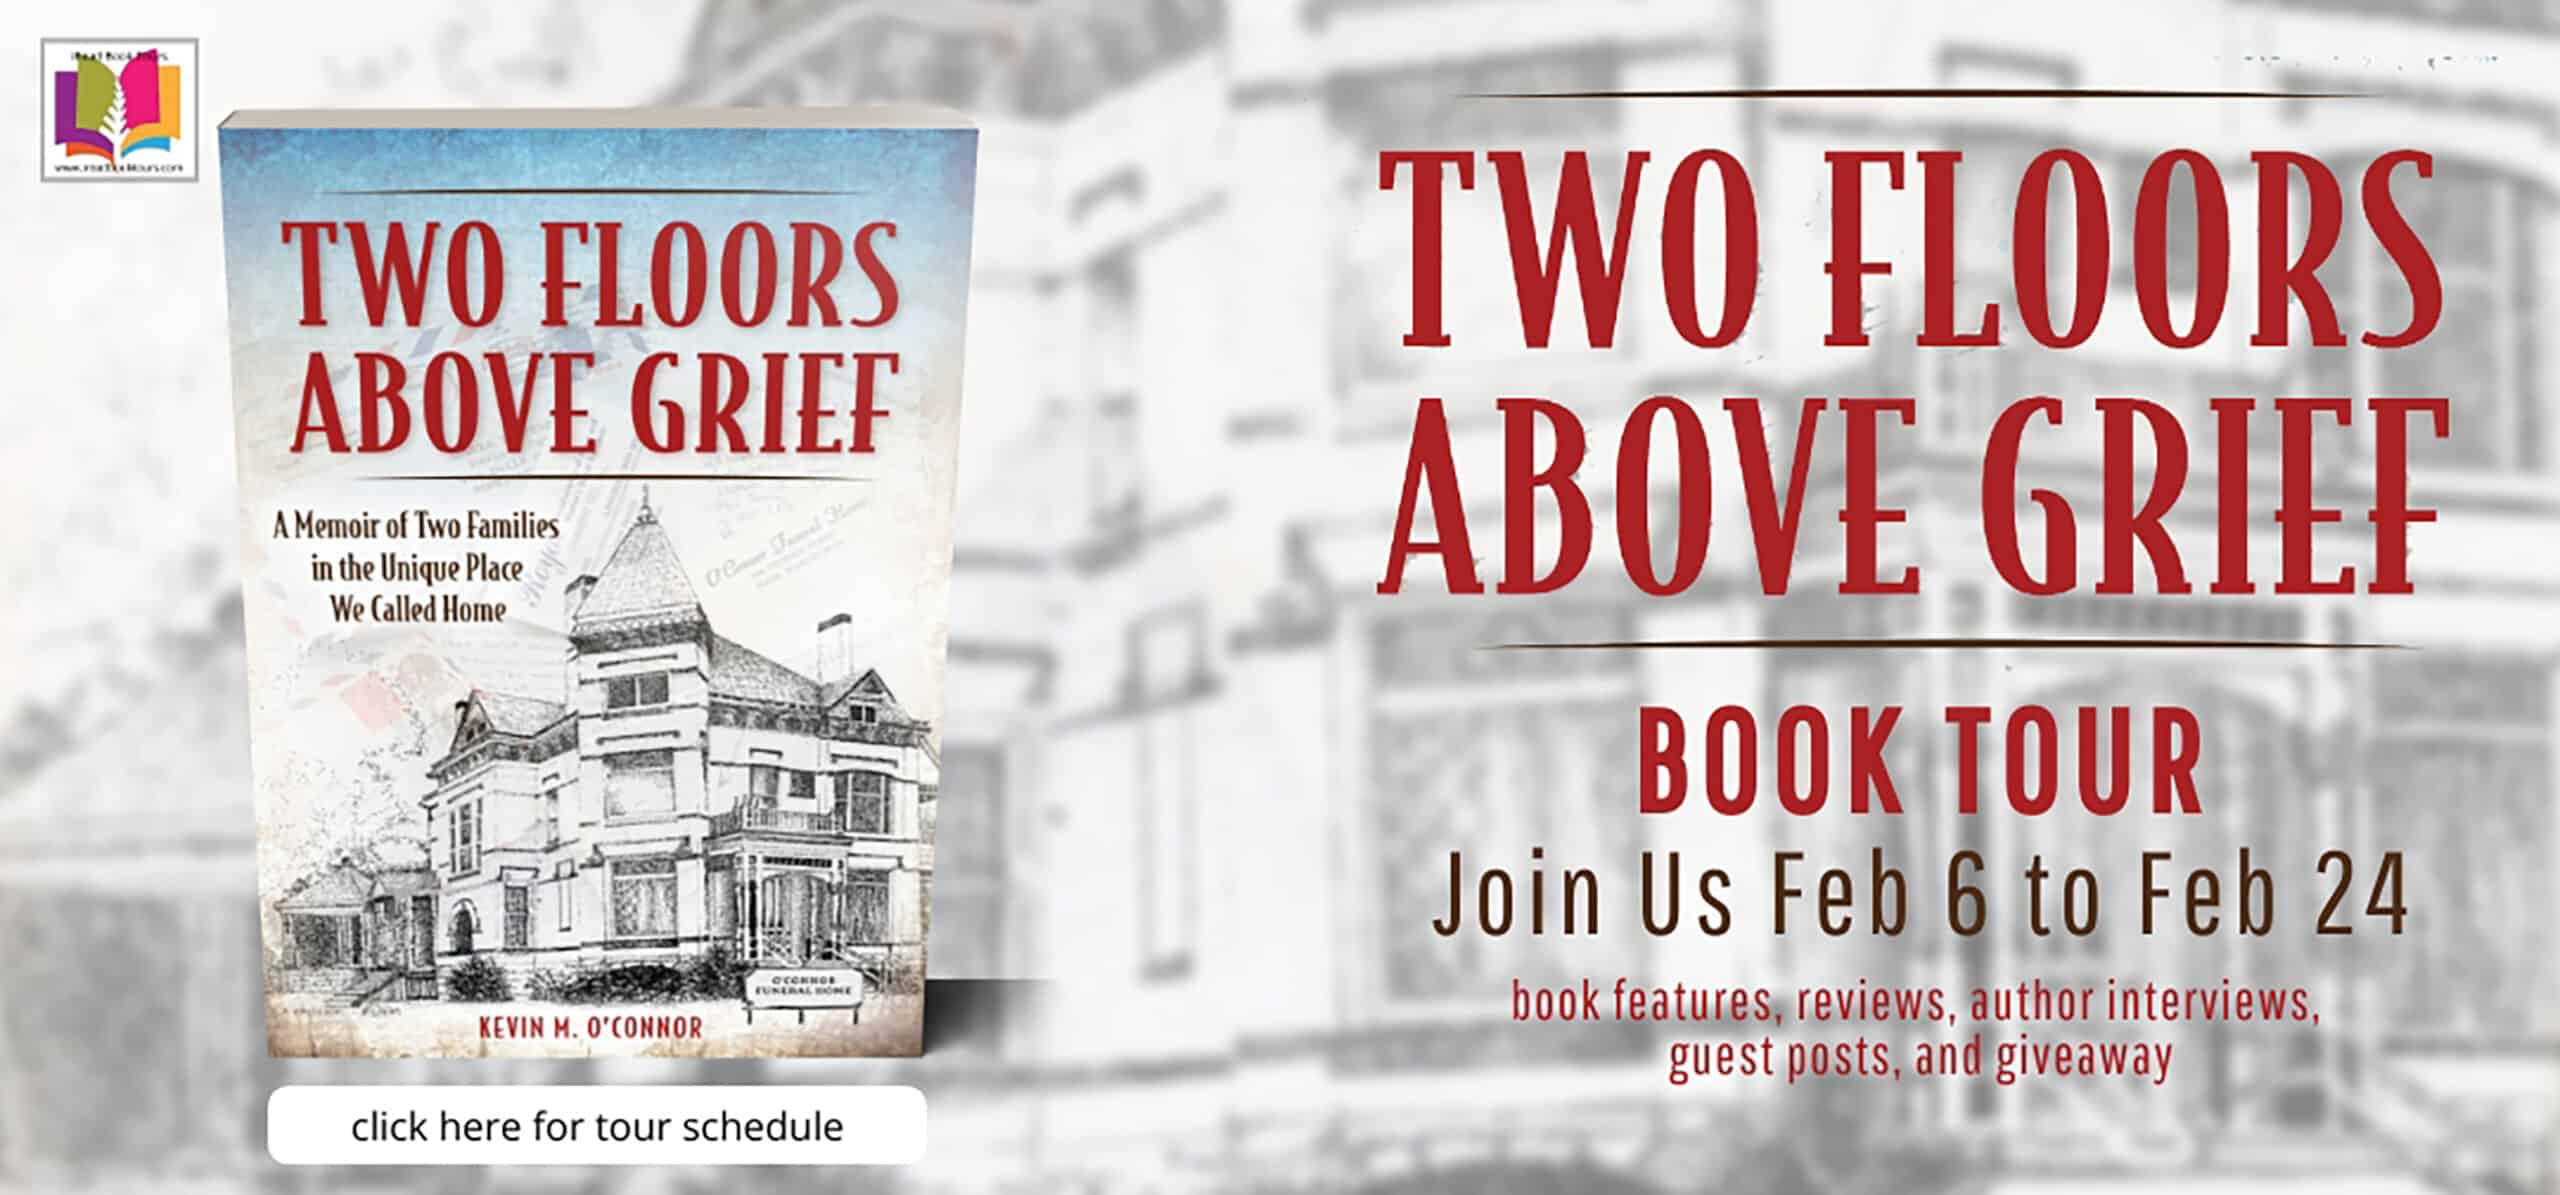 Two Floors Above Grief: A Memoir of Two Families in the Unique Place We Called Home by Kevin M. O'Connor | 1 Signed Copy Available 